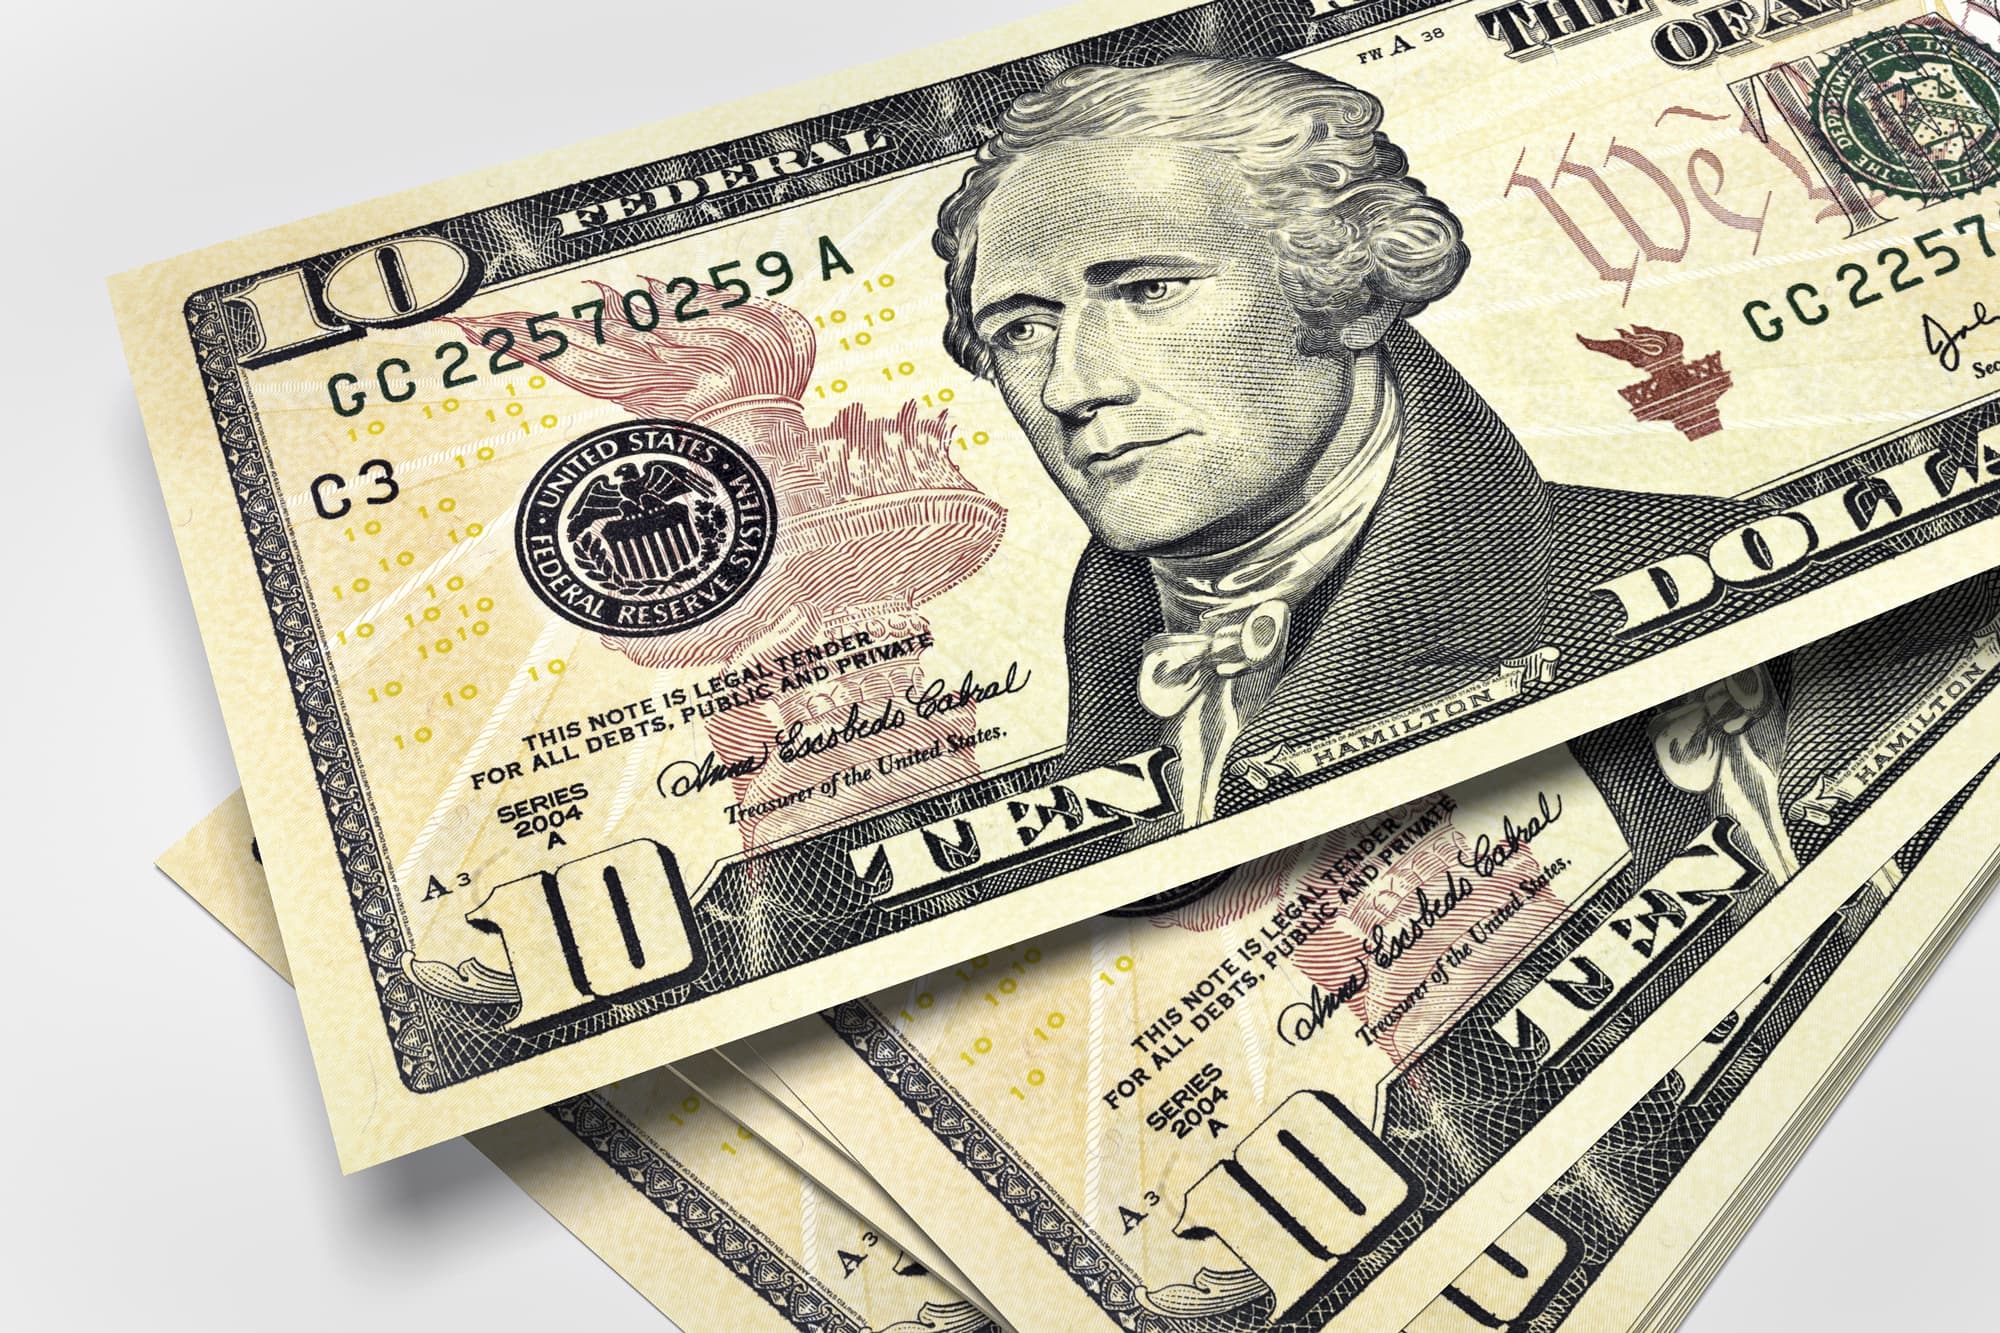 Your face could potentially be on the new $10 bill